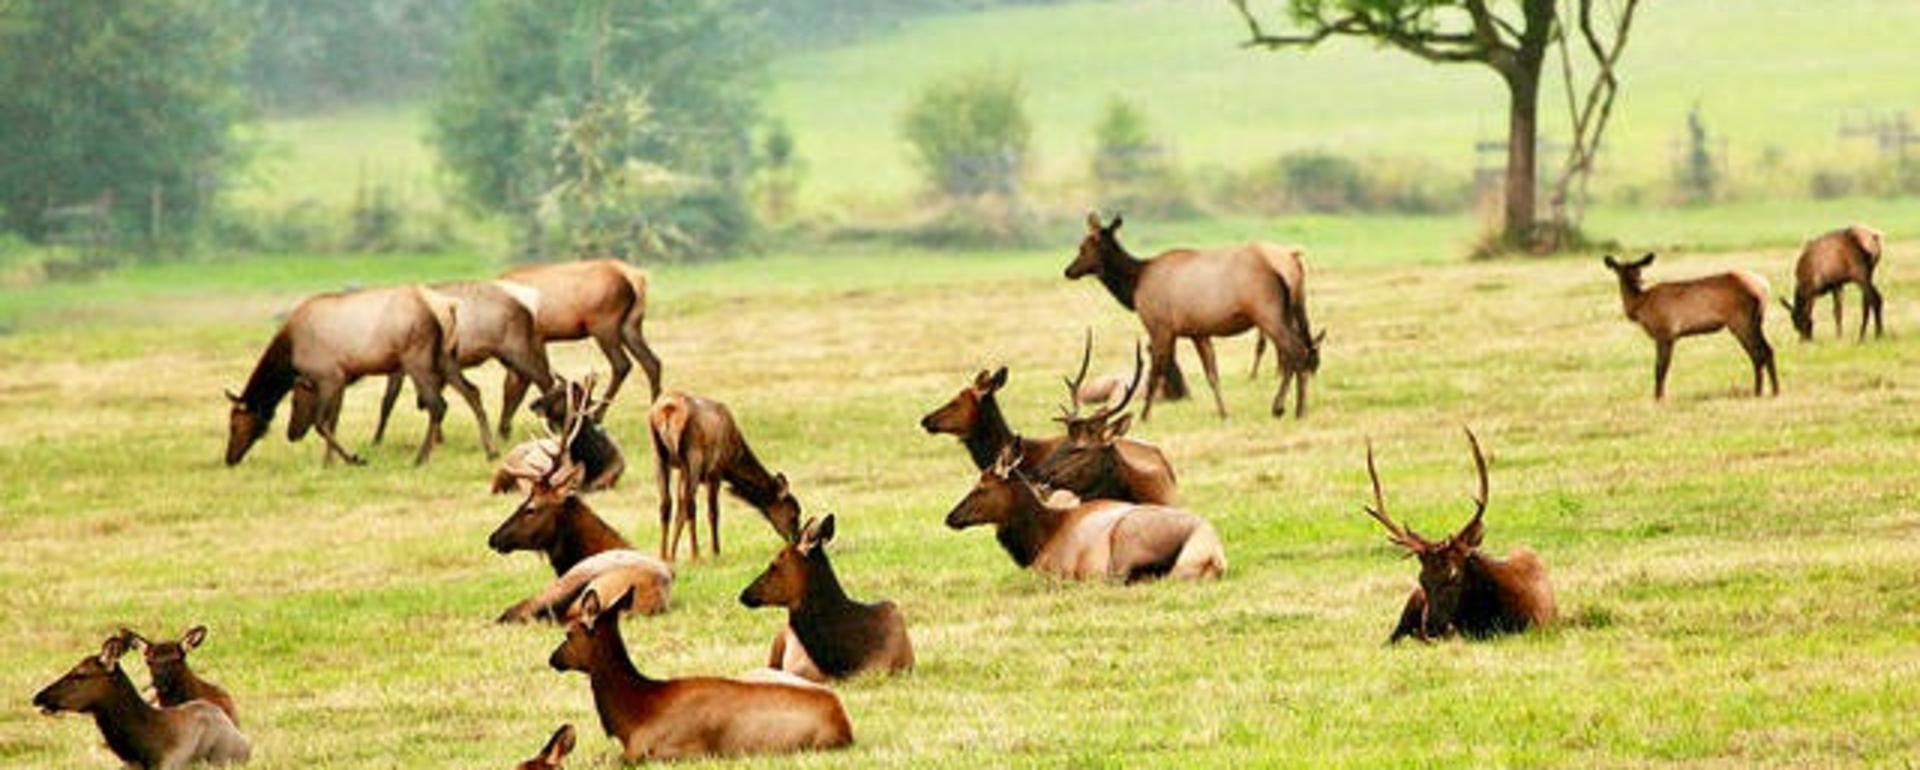 Public elk on a private ranch 